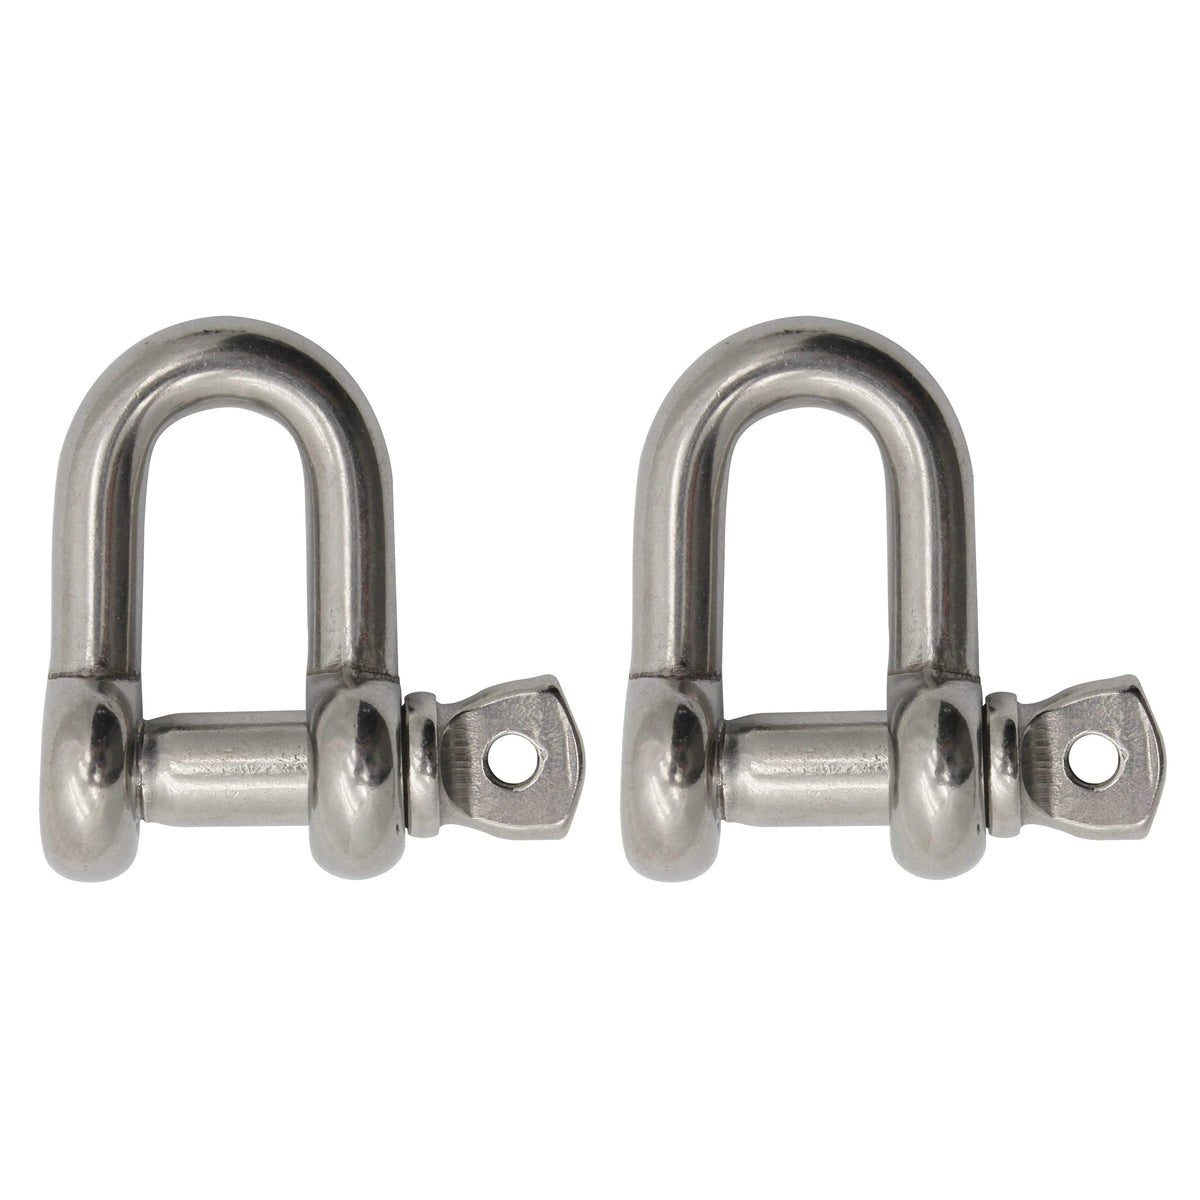 Extreme Max BoatTector SS Chain Shackle 5/8" 2-pk #3006.8276.2